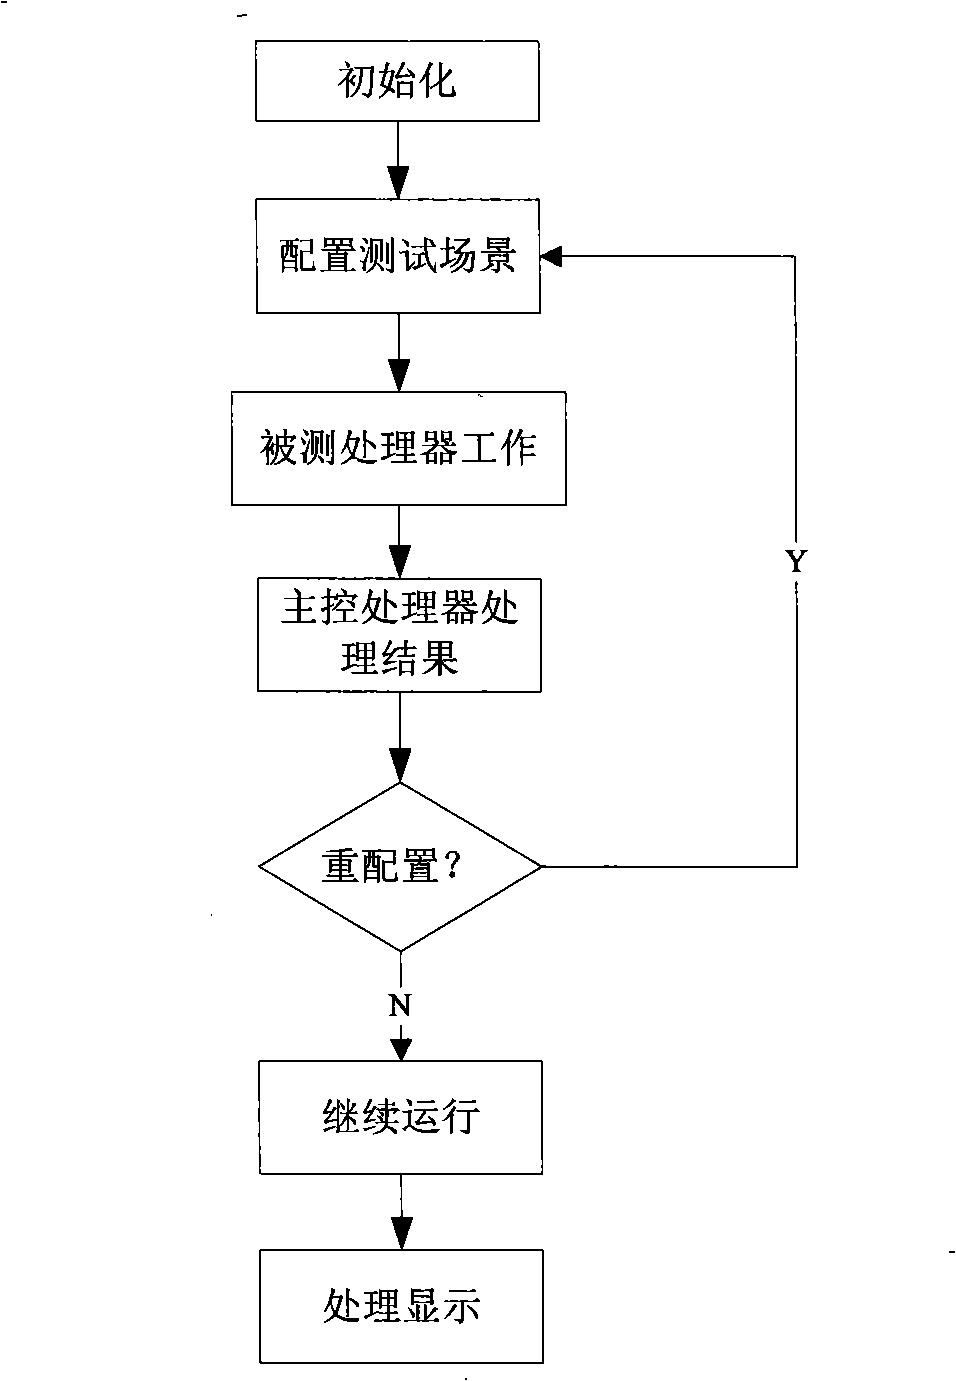 Spatial processor single particle experiment automatized test system and method